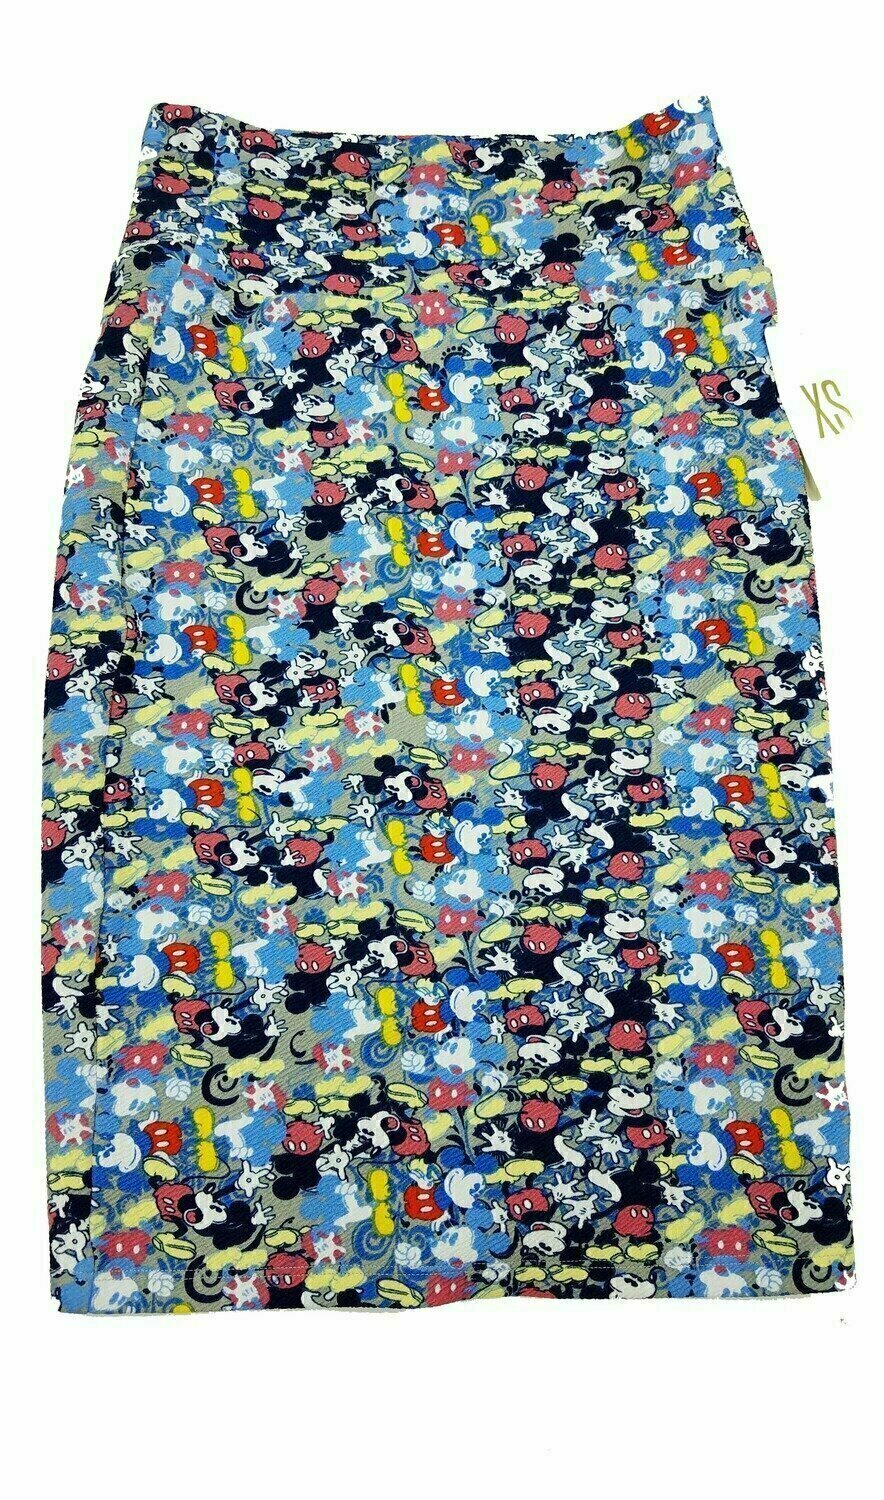 LuLaRoe Cassie b X-Small (XS) Disney Mickey Mouse Waving Black Yellow Blue Red White Womens Knee Length Pencil Skirt fits sizes 2-4  XS-58